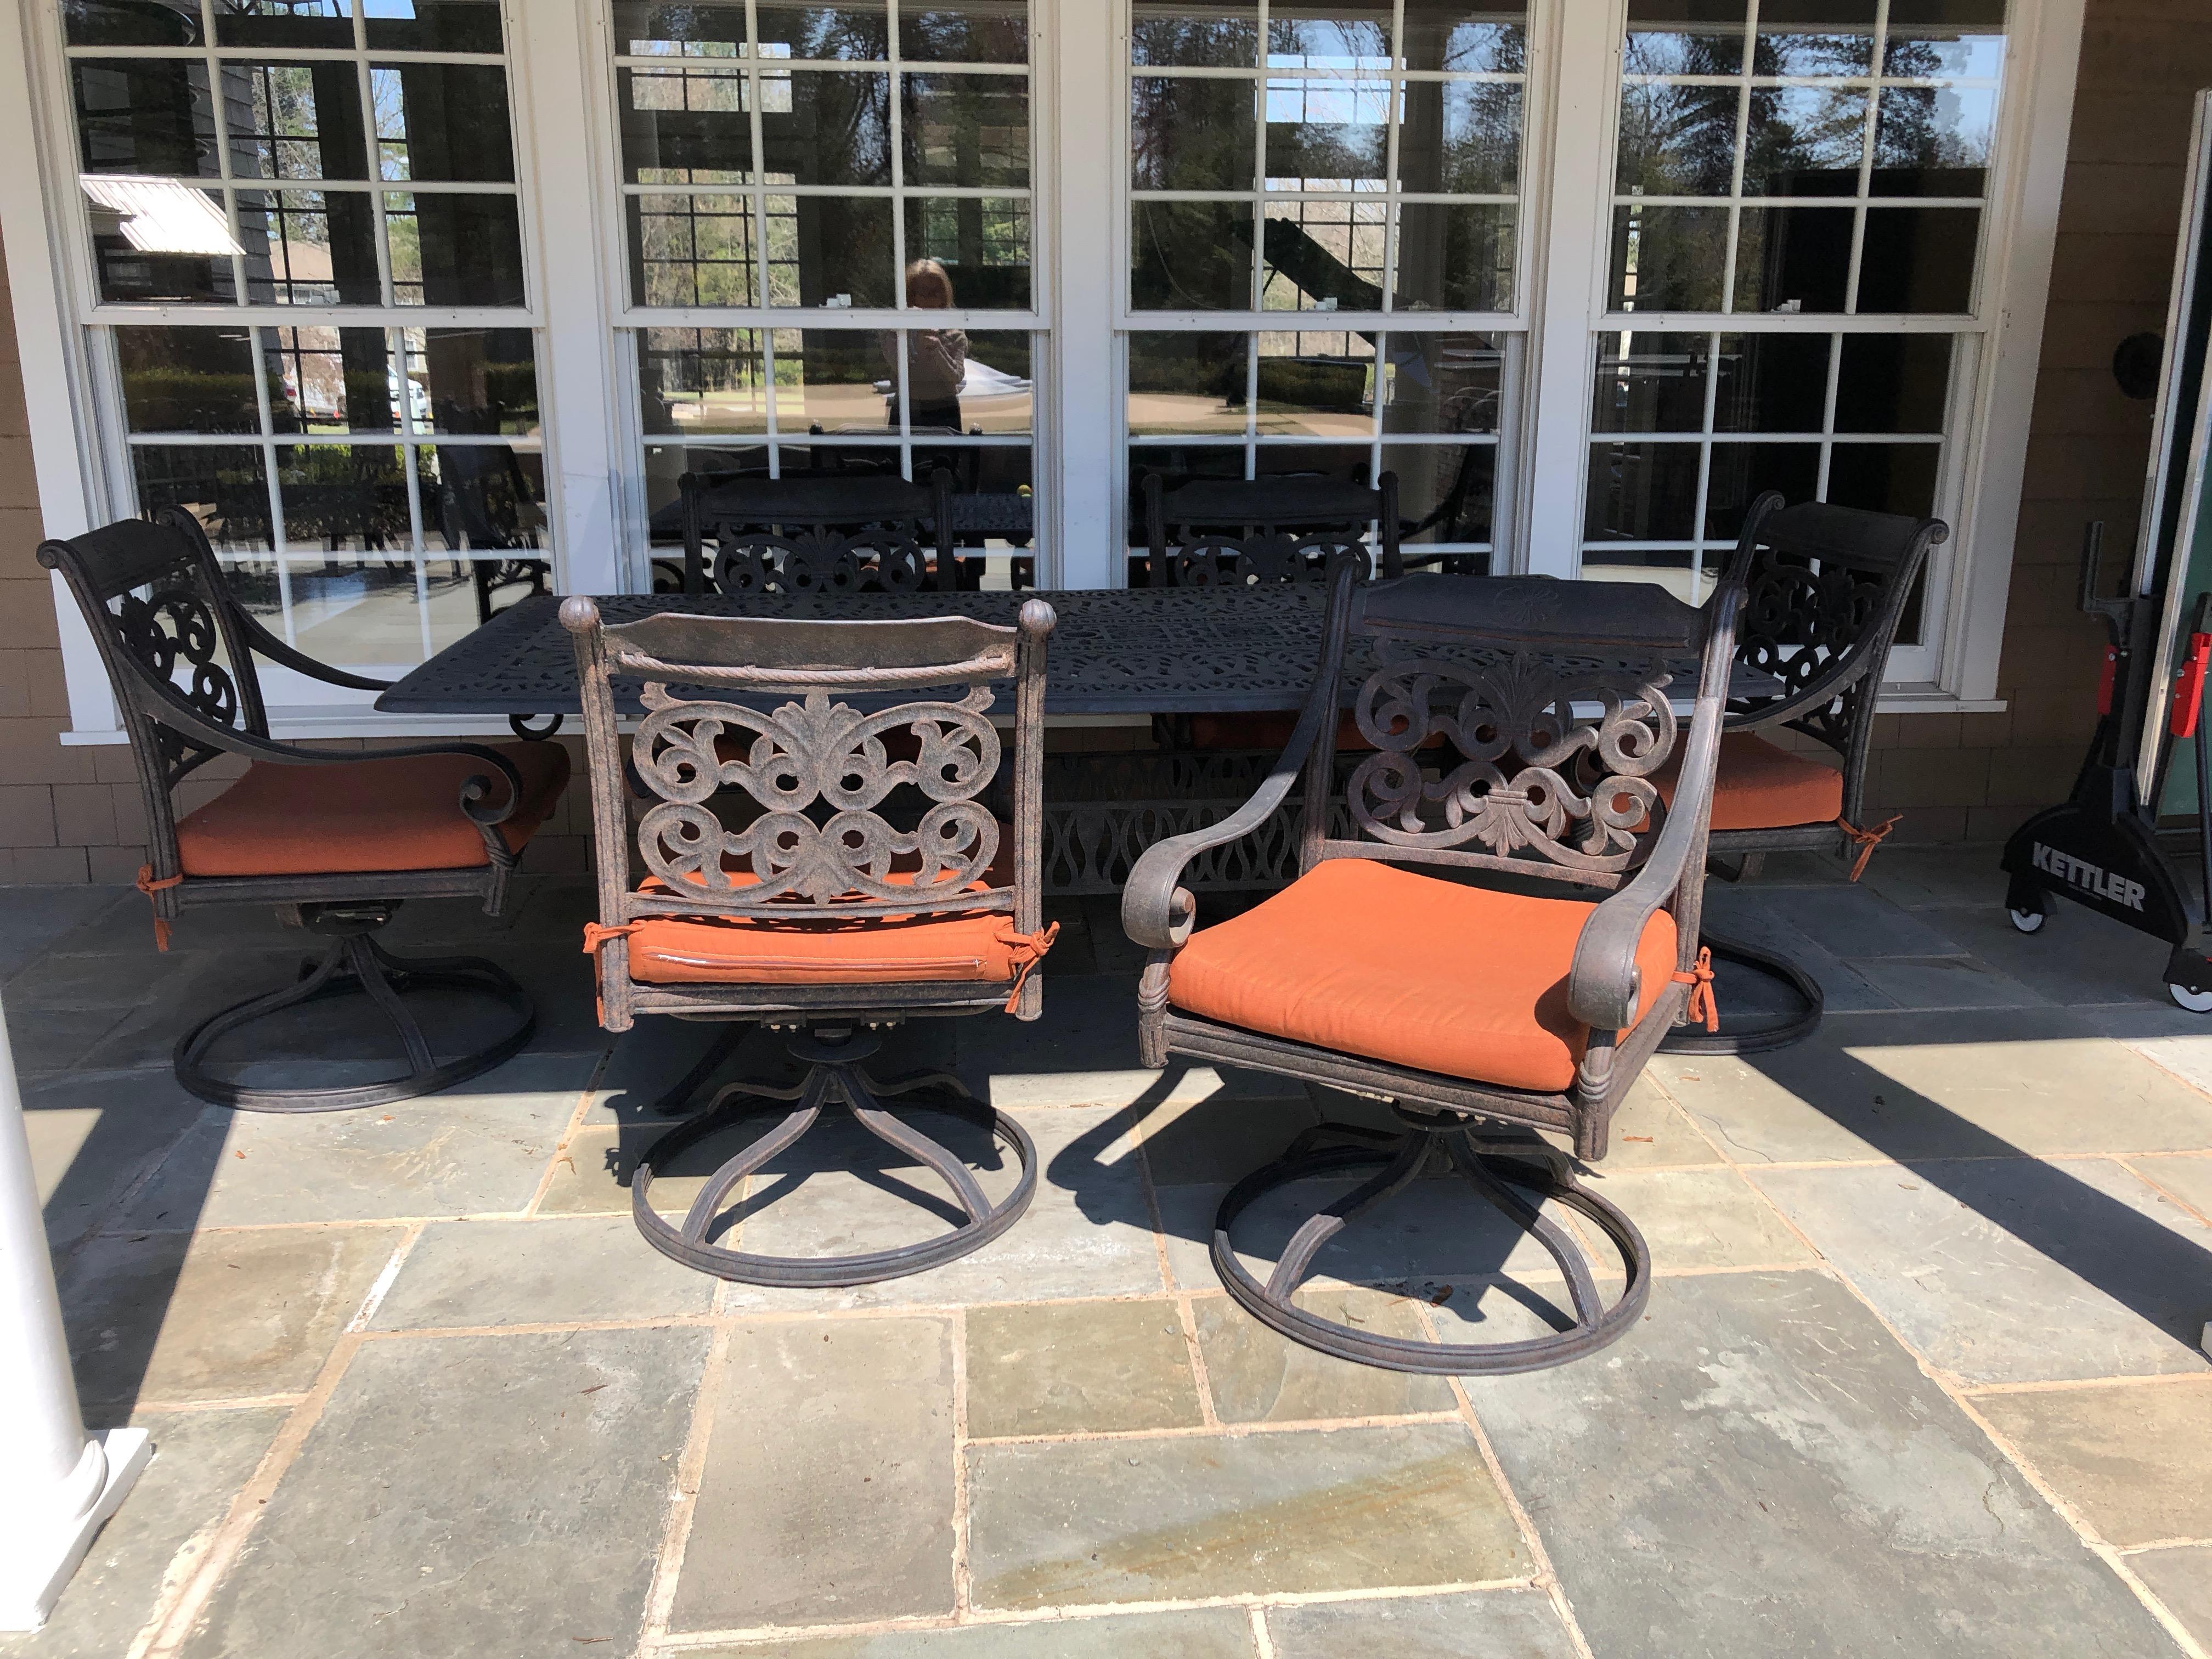 Let's Have a Party Large Cast Aluminum Patio Dining Table and 6 Armchairs 5